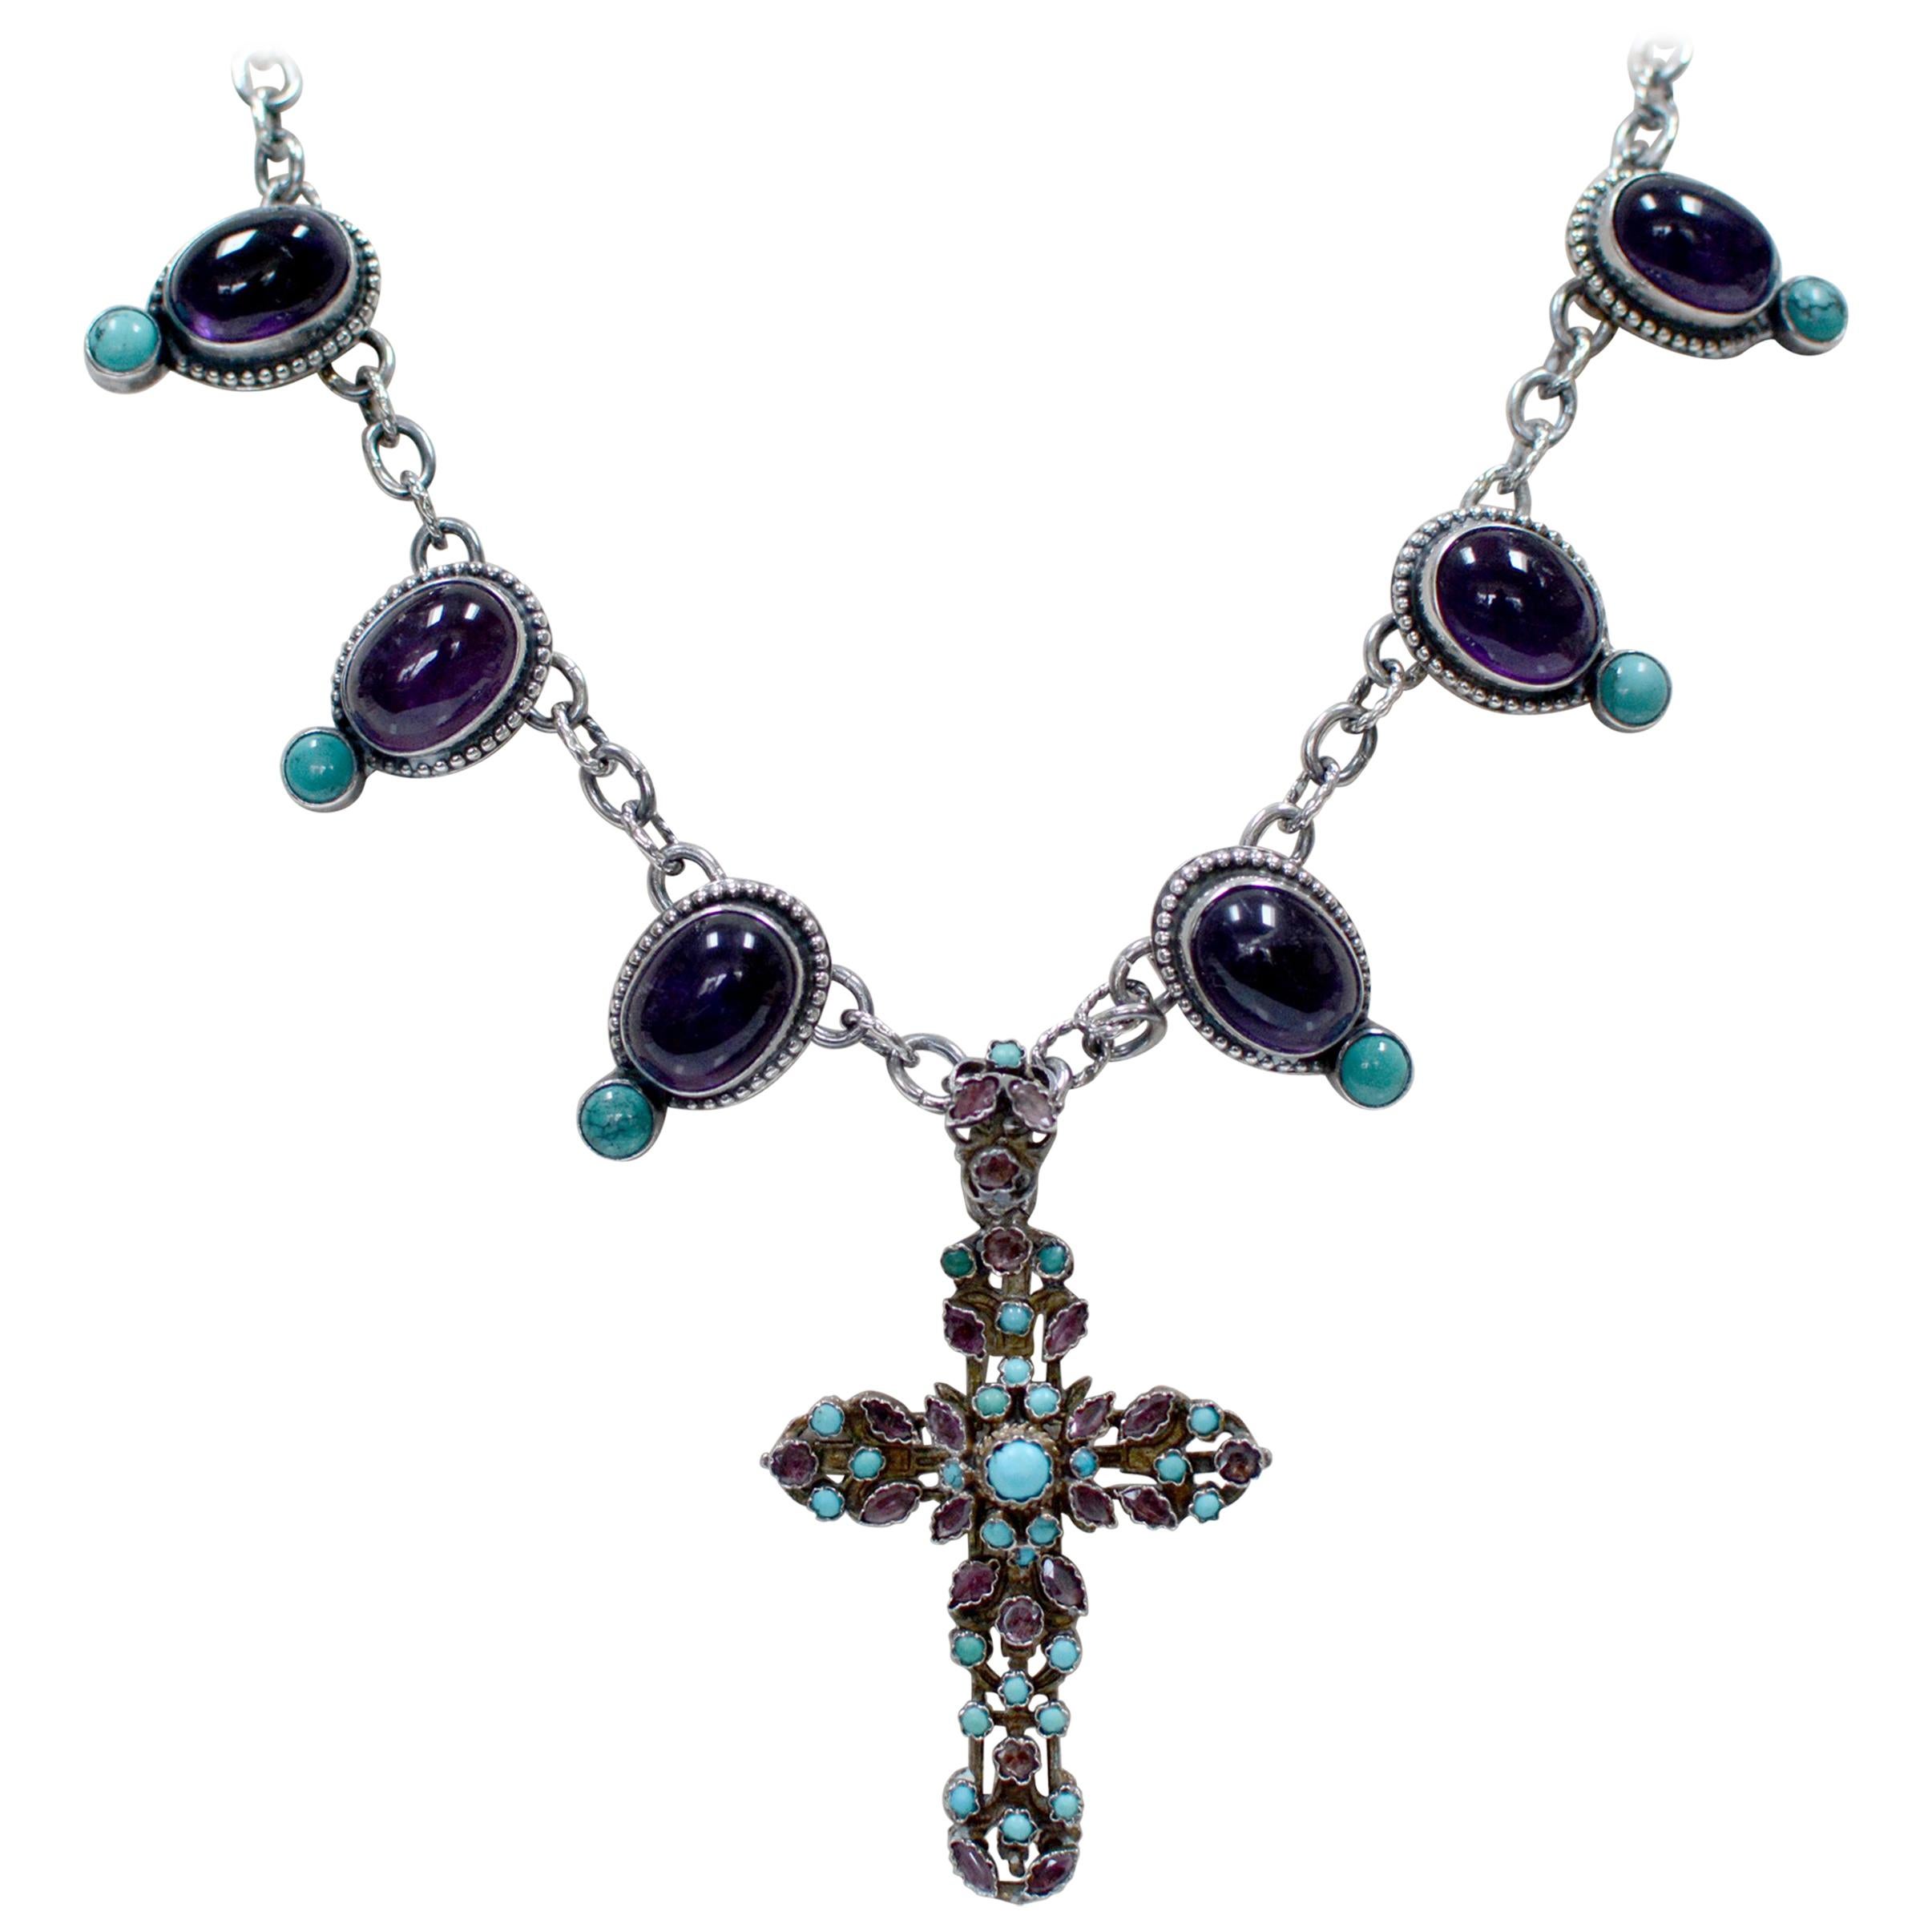 Jill Garber Antique Austro Hungarian Cross Necklace with Turquoise and Amethyst For Sale